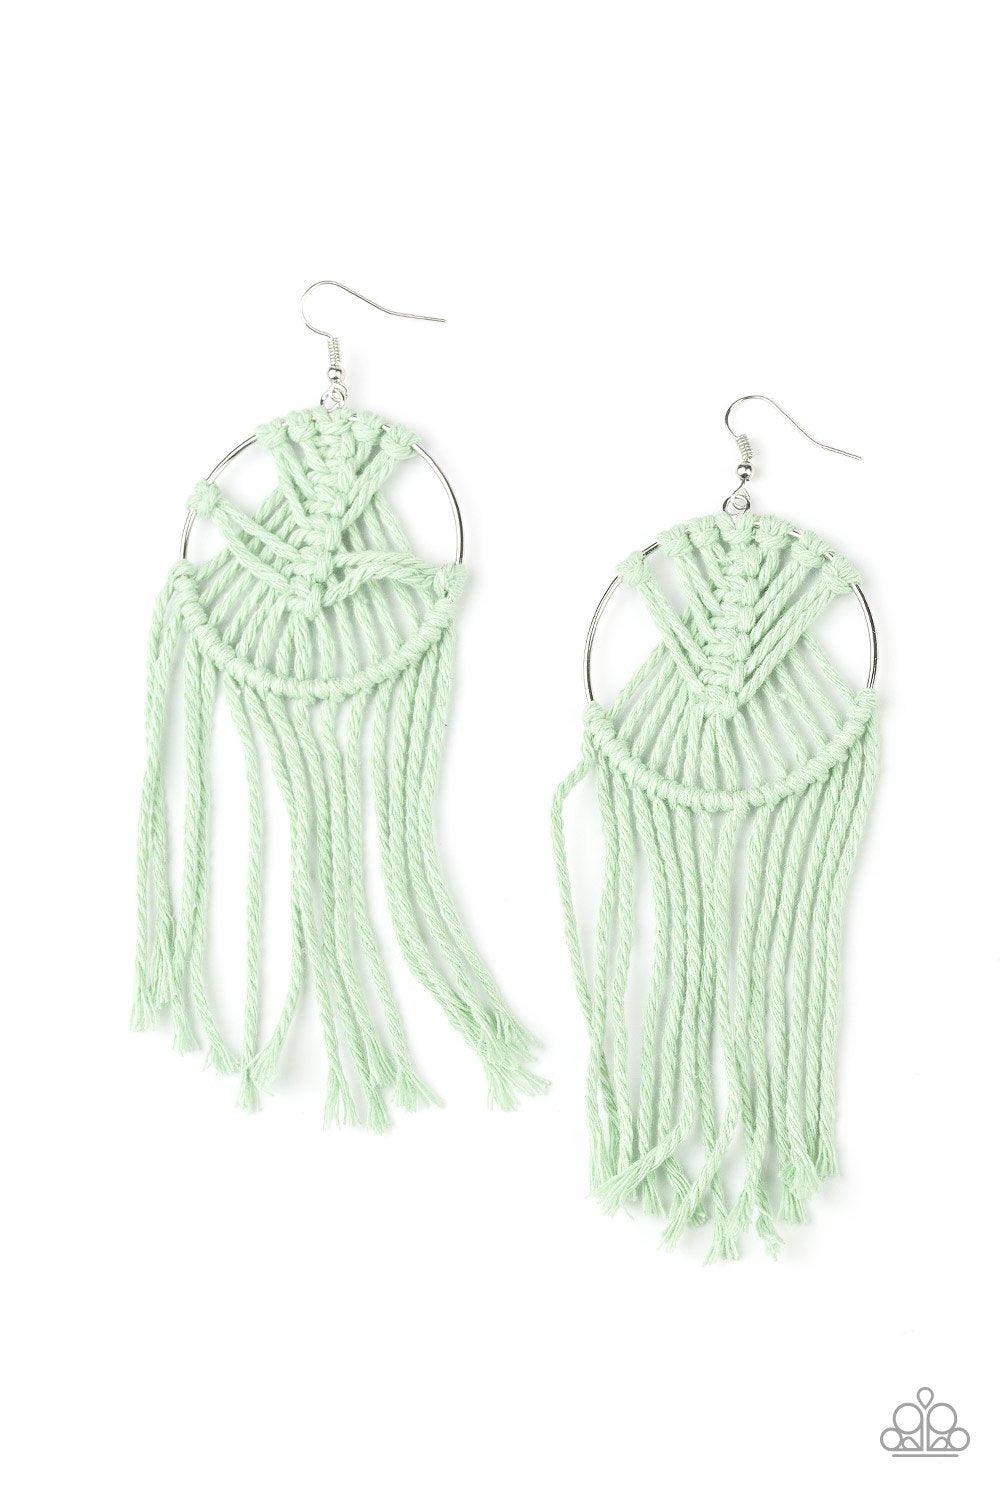 MACRAME, Myself and I Mint Green Earrings - Paparazzi Accessories-CarasShop.com - $5 Jewelry by Cara Jewels